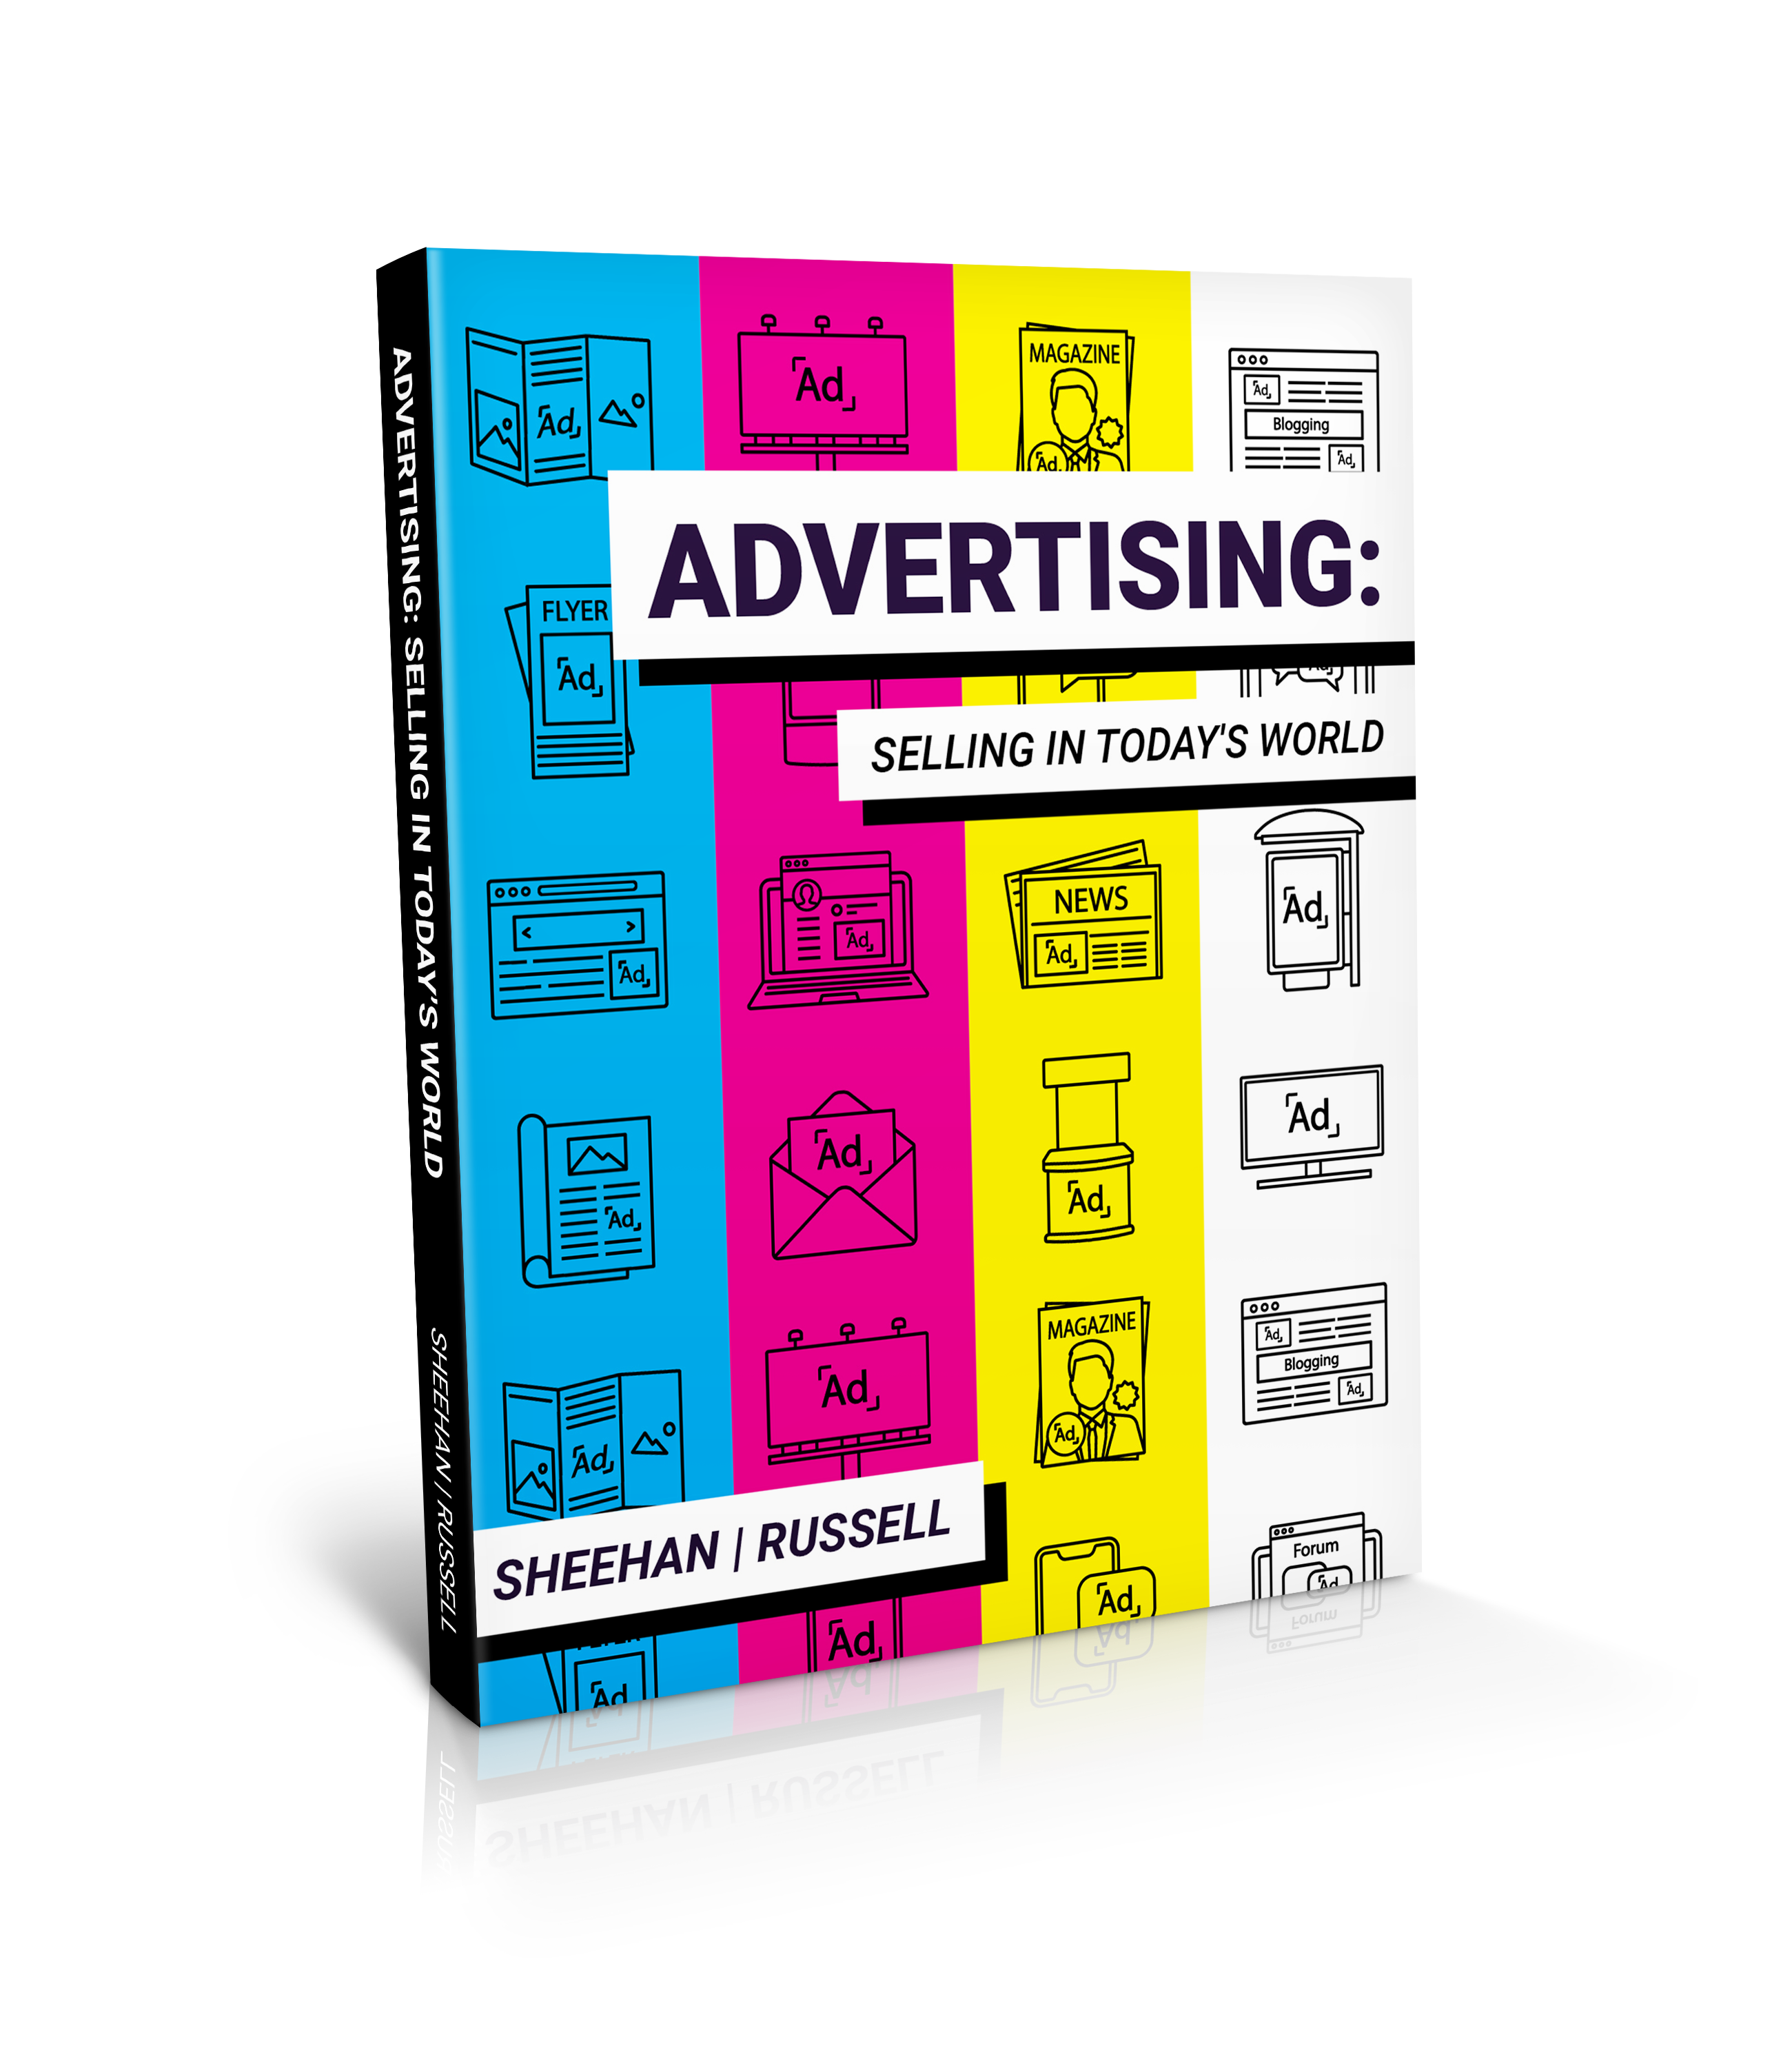 "Advertising: Selling in Today's World" Digital Textbook Cover